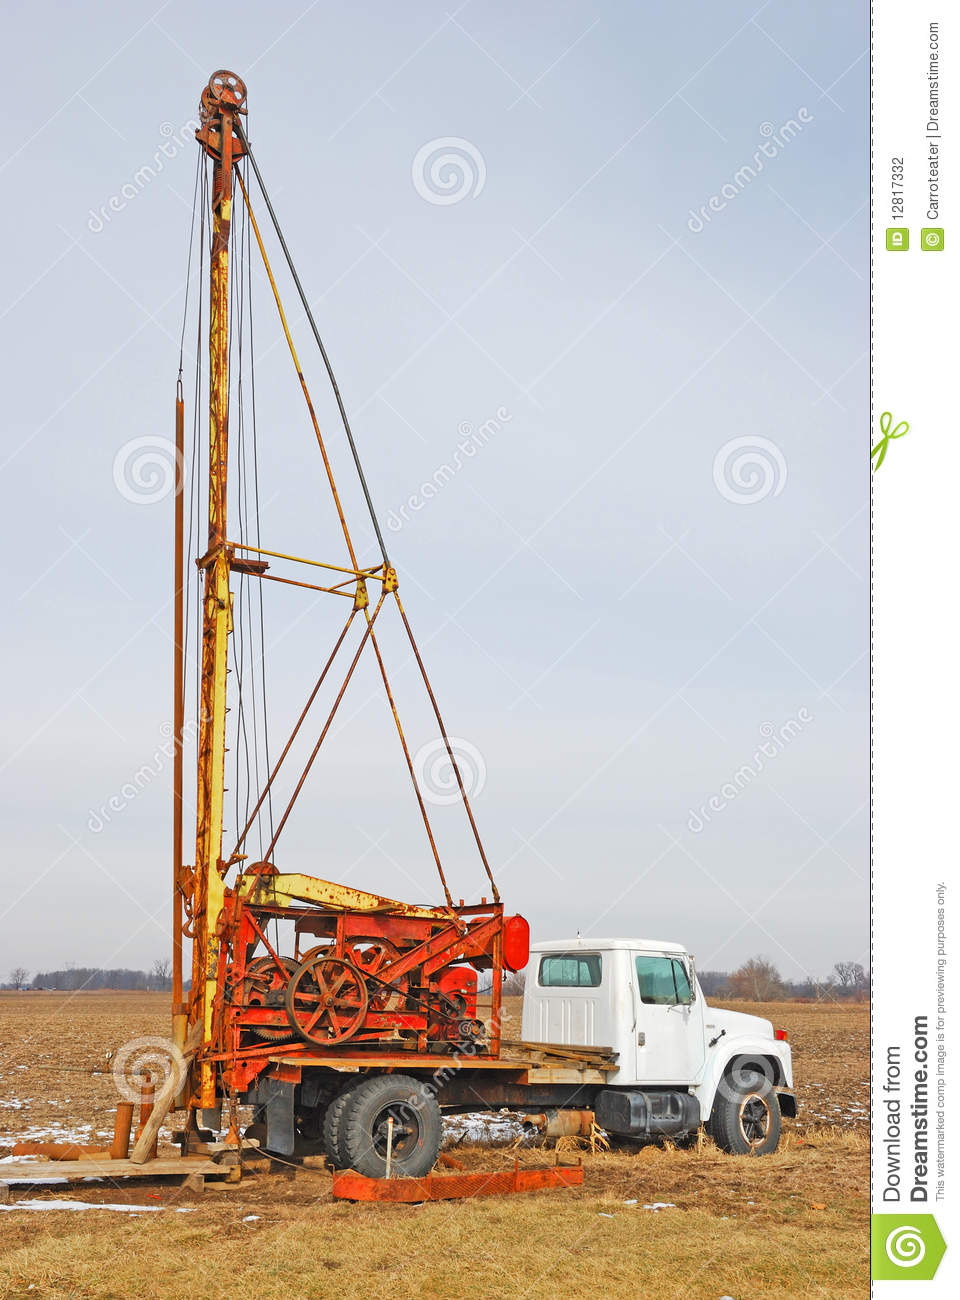 Water Well Clipart Water Well Drilling Rig